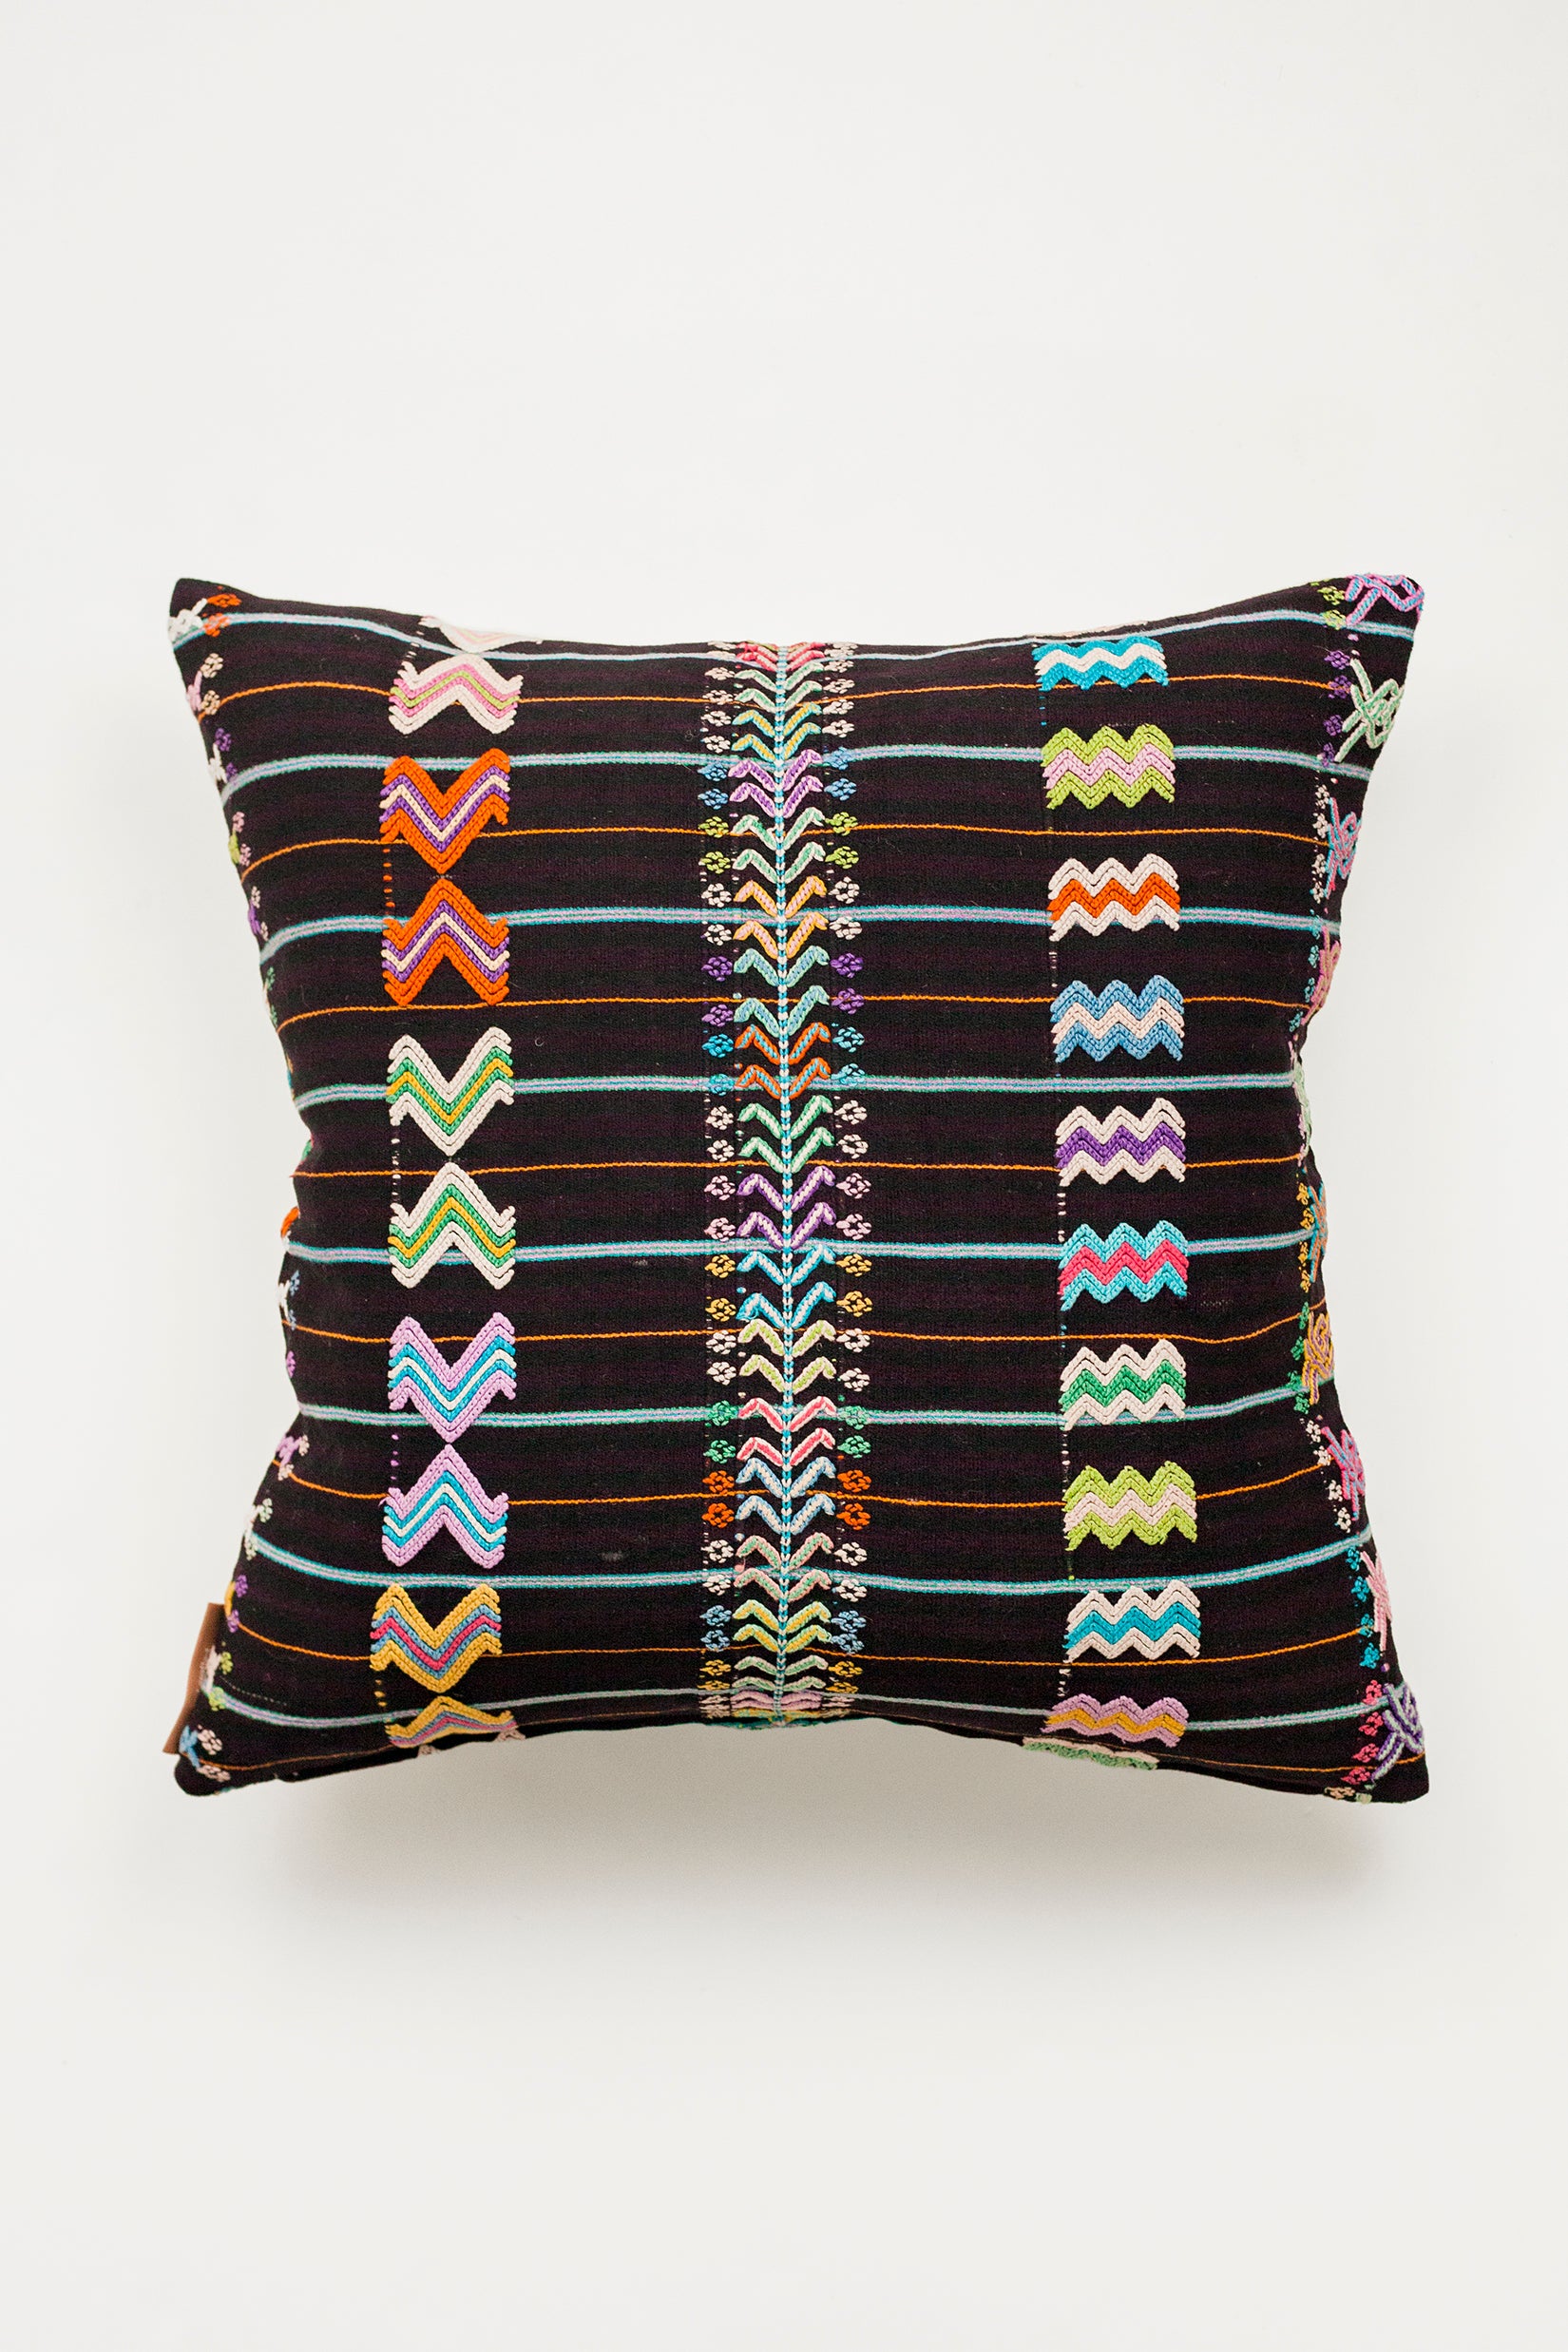 A square throw pillow with a striped brown burgundy textile and colorful hand embroidered brocade